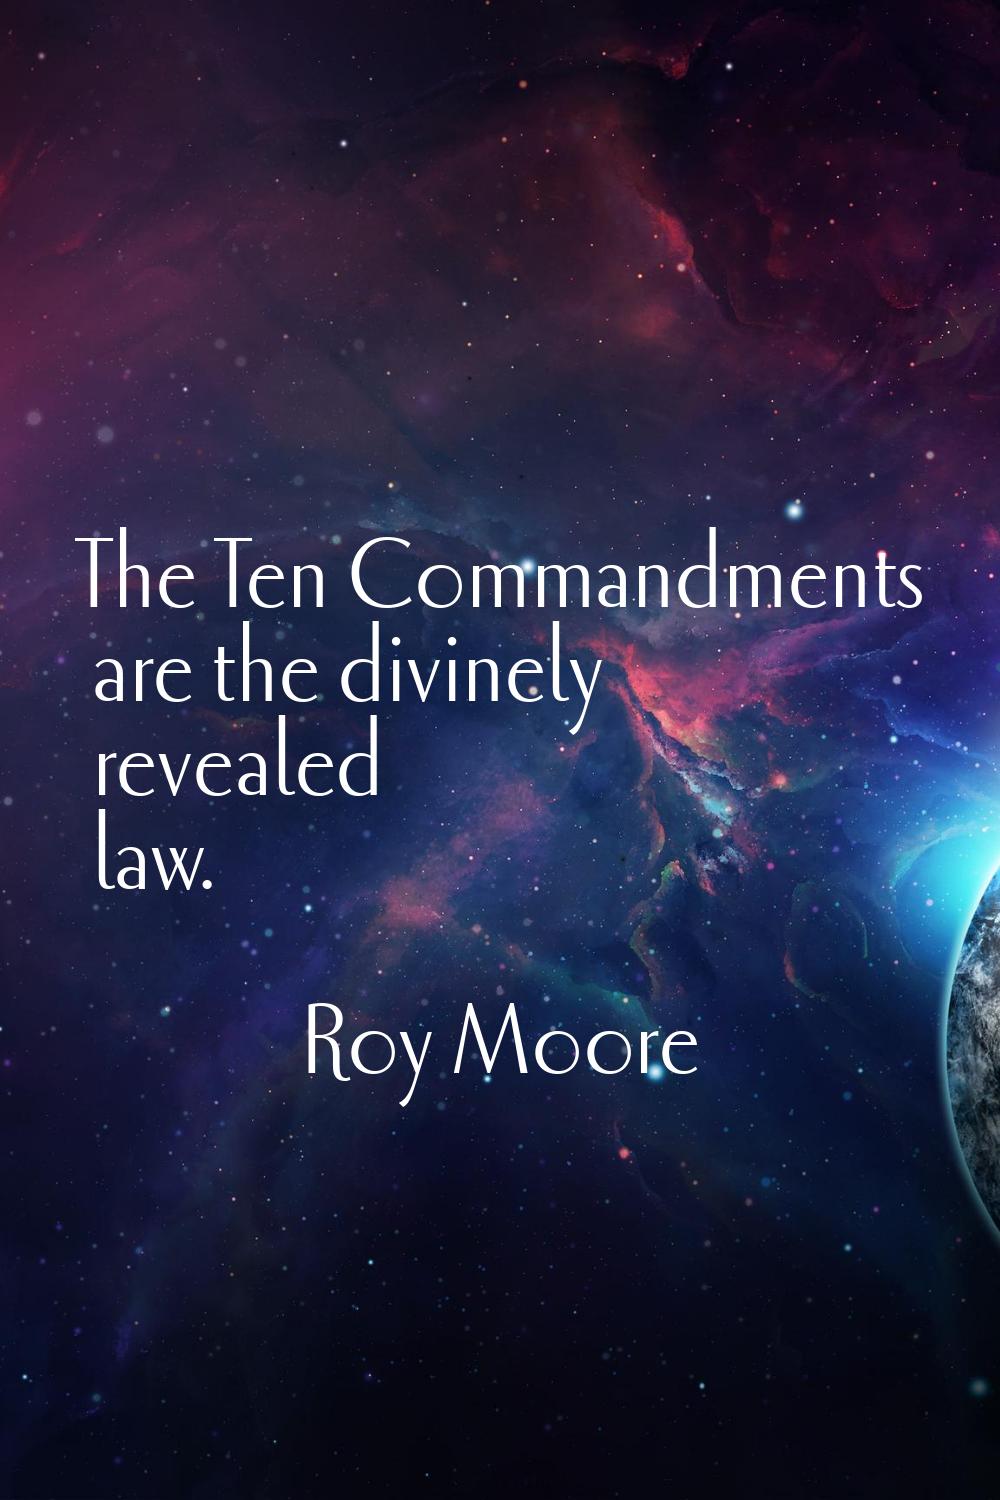 The Ten Commandments are the divinely revealed law.